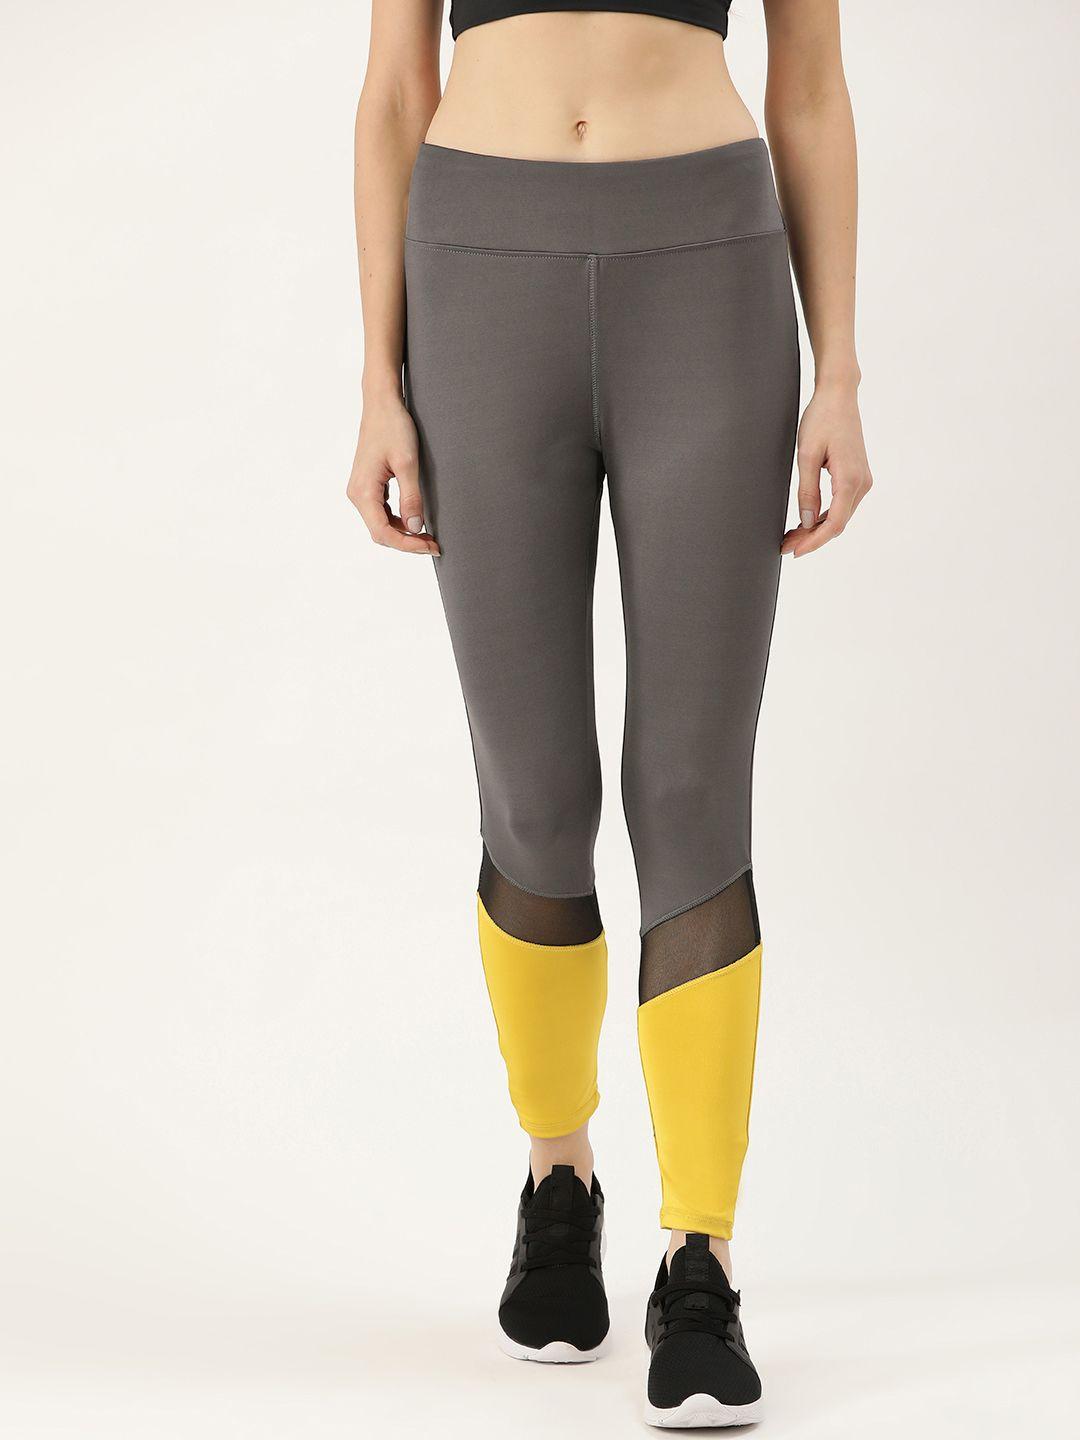 dressberry-women-charcoal-grey-&-mustard-yellow-colourblocked-cropped-tights